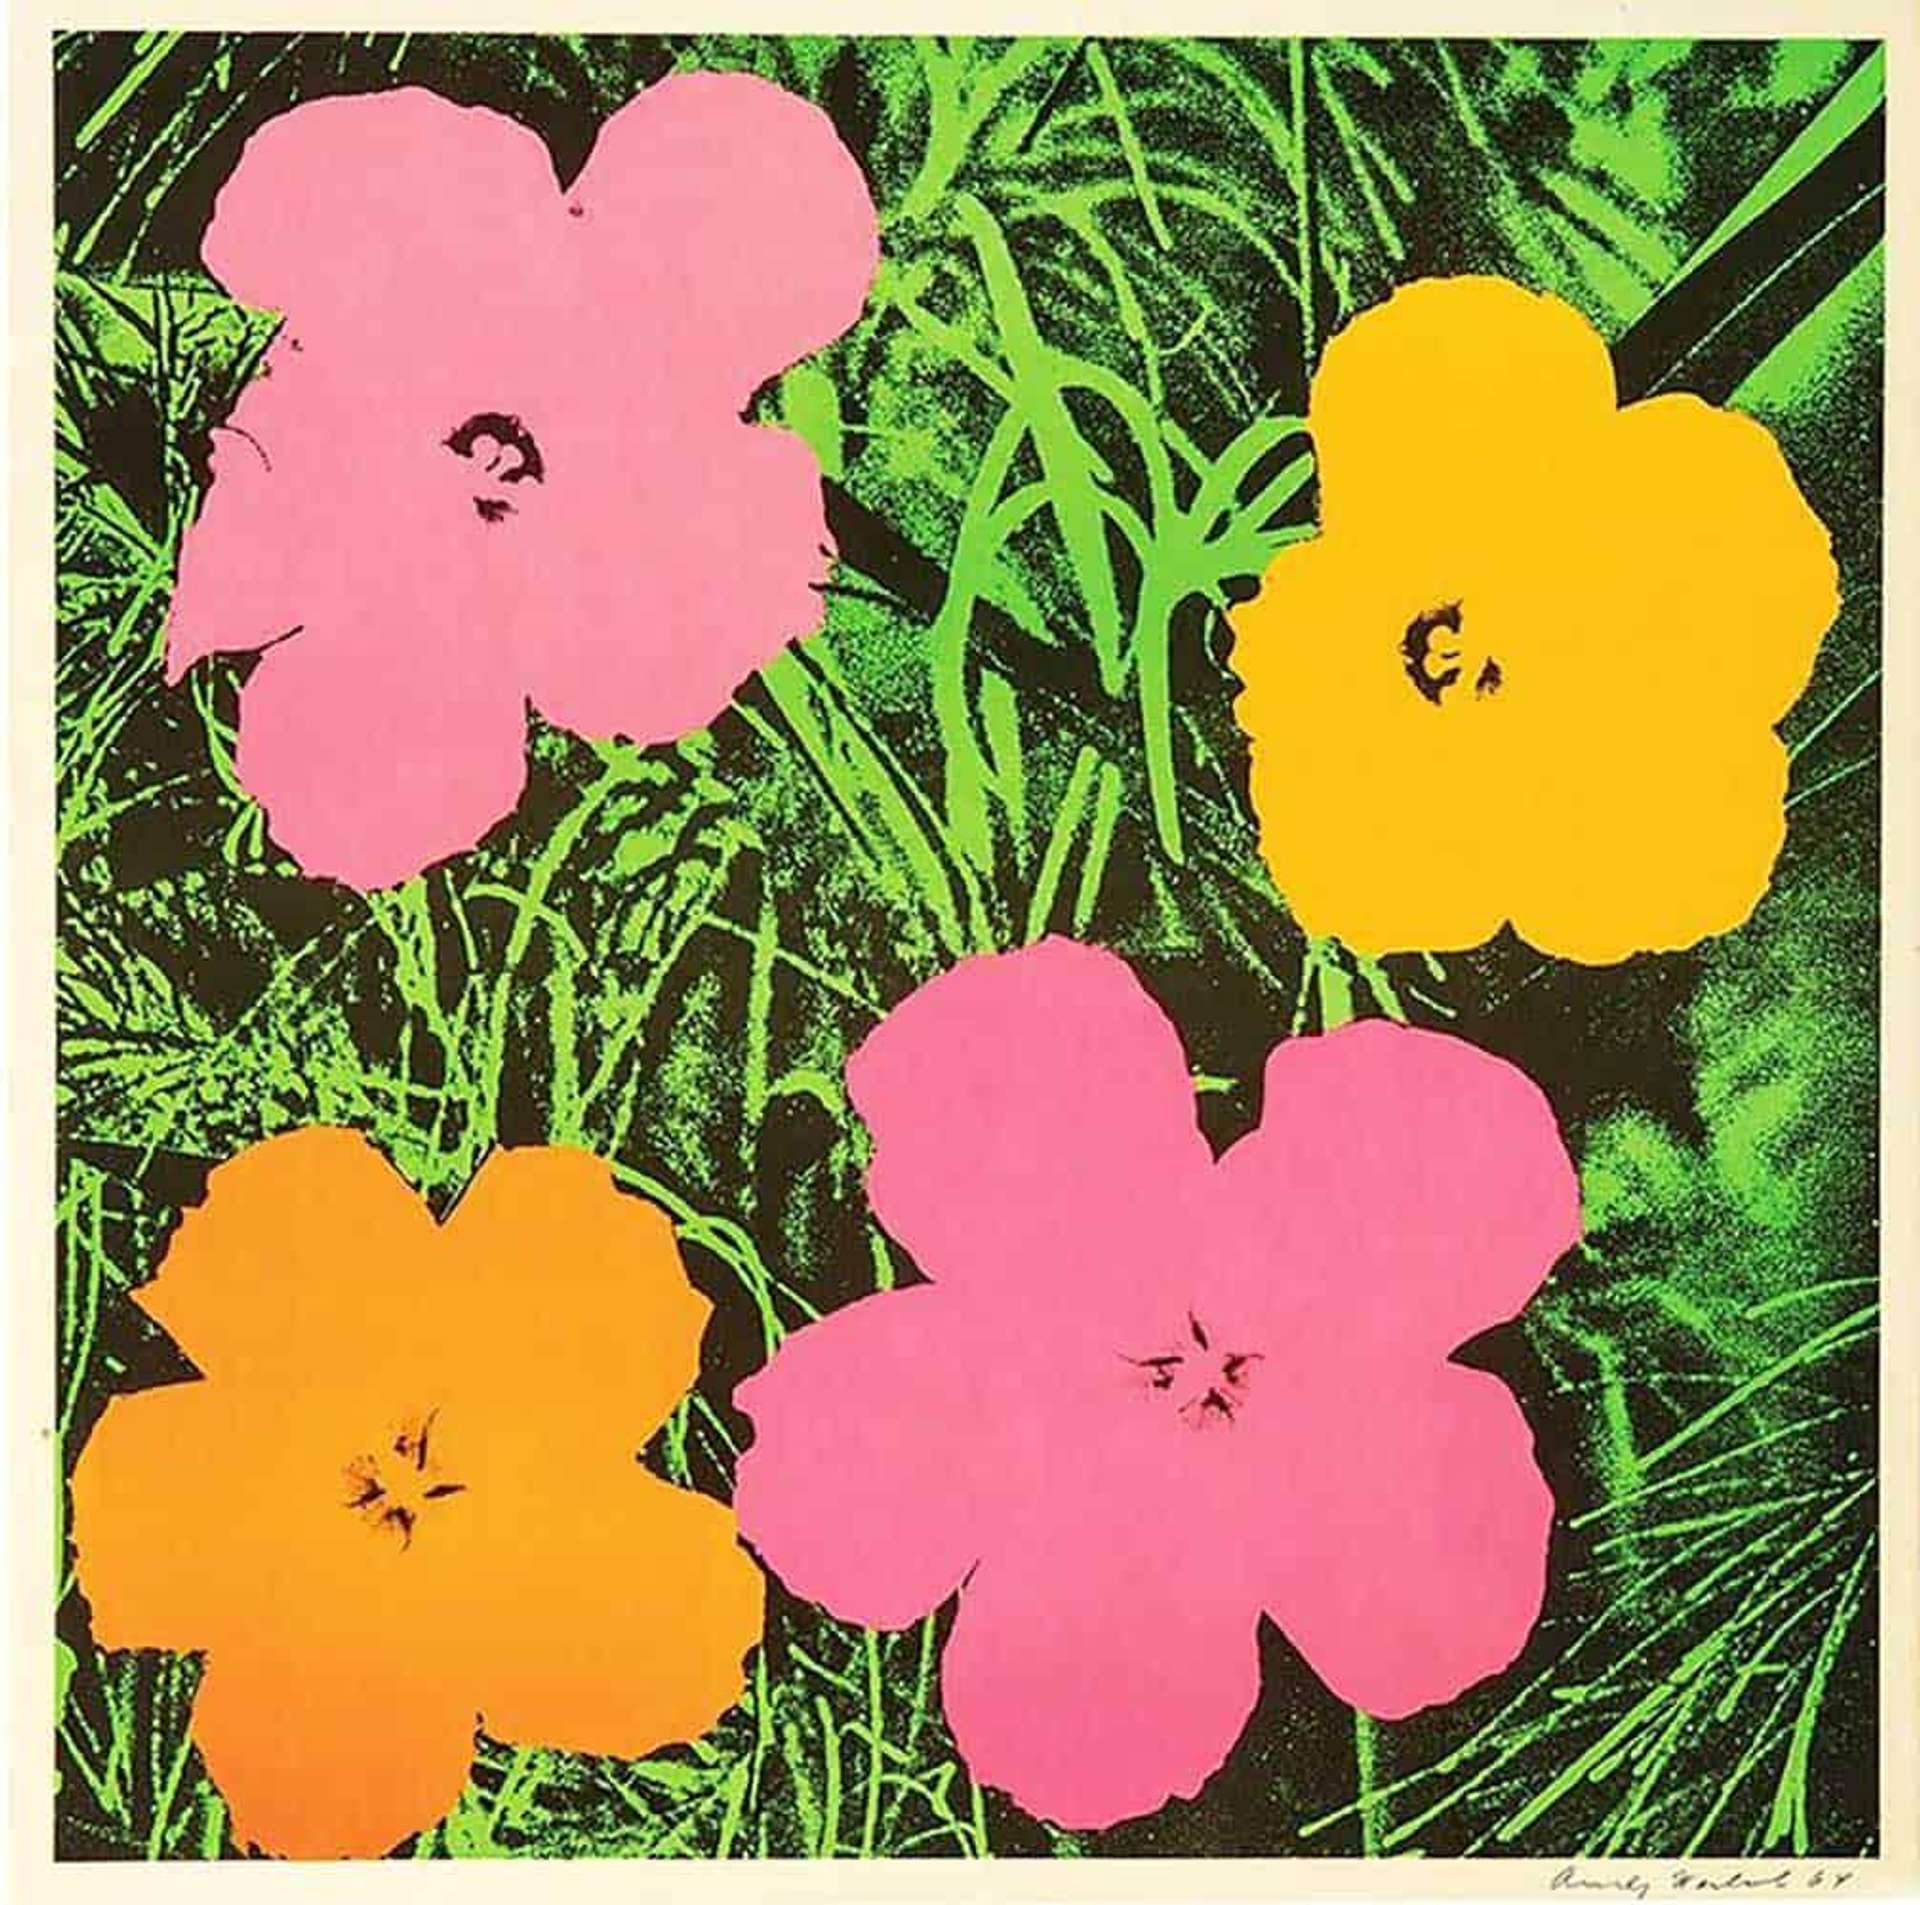 Flowers (F. & S. 6) by Andy Warhol